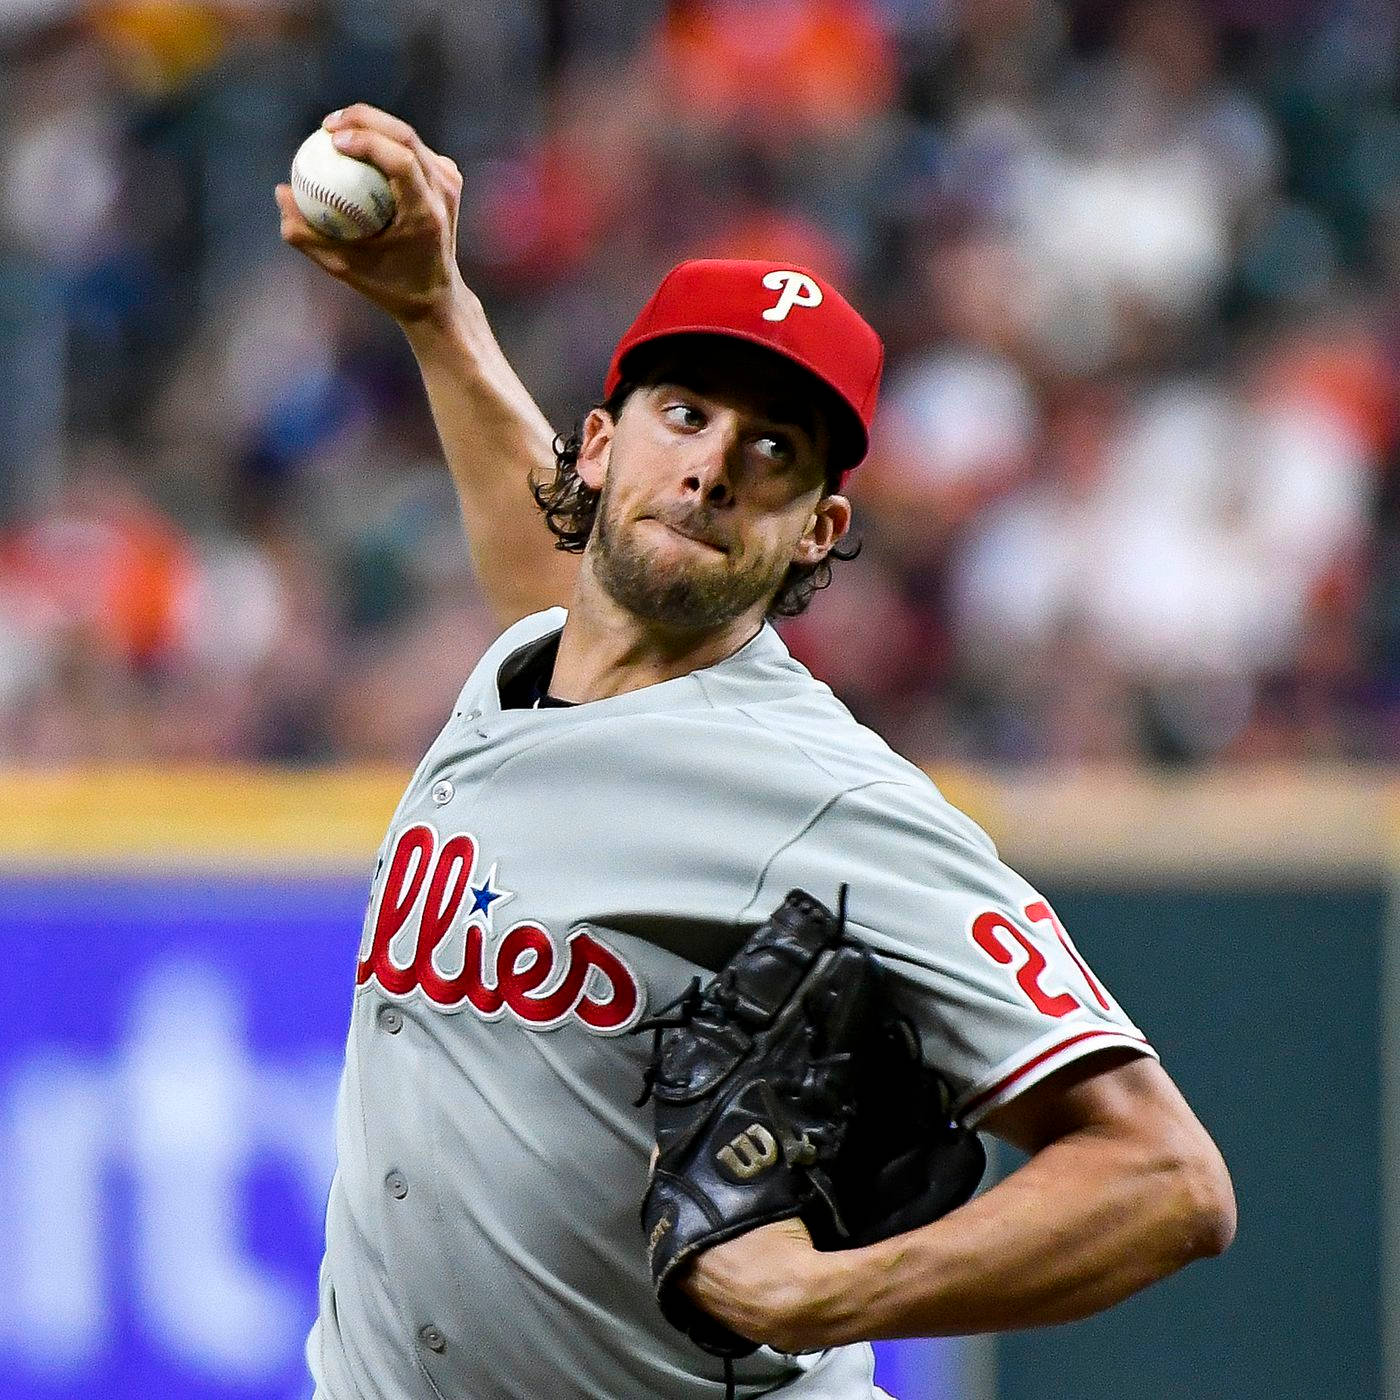 Aaron Nola Holding Ball For Pitch Wallpaper